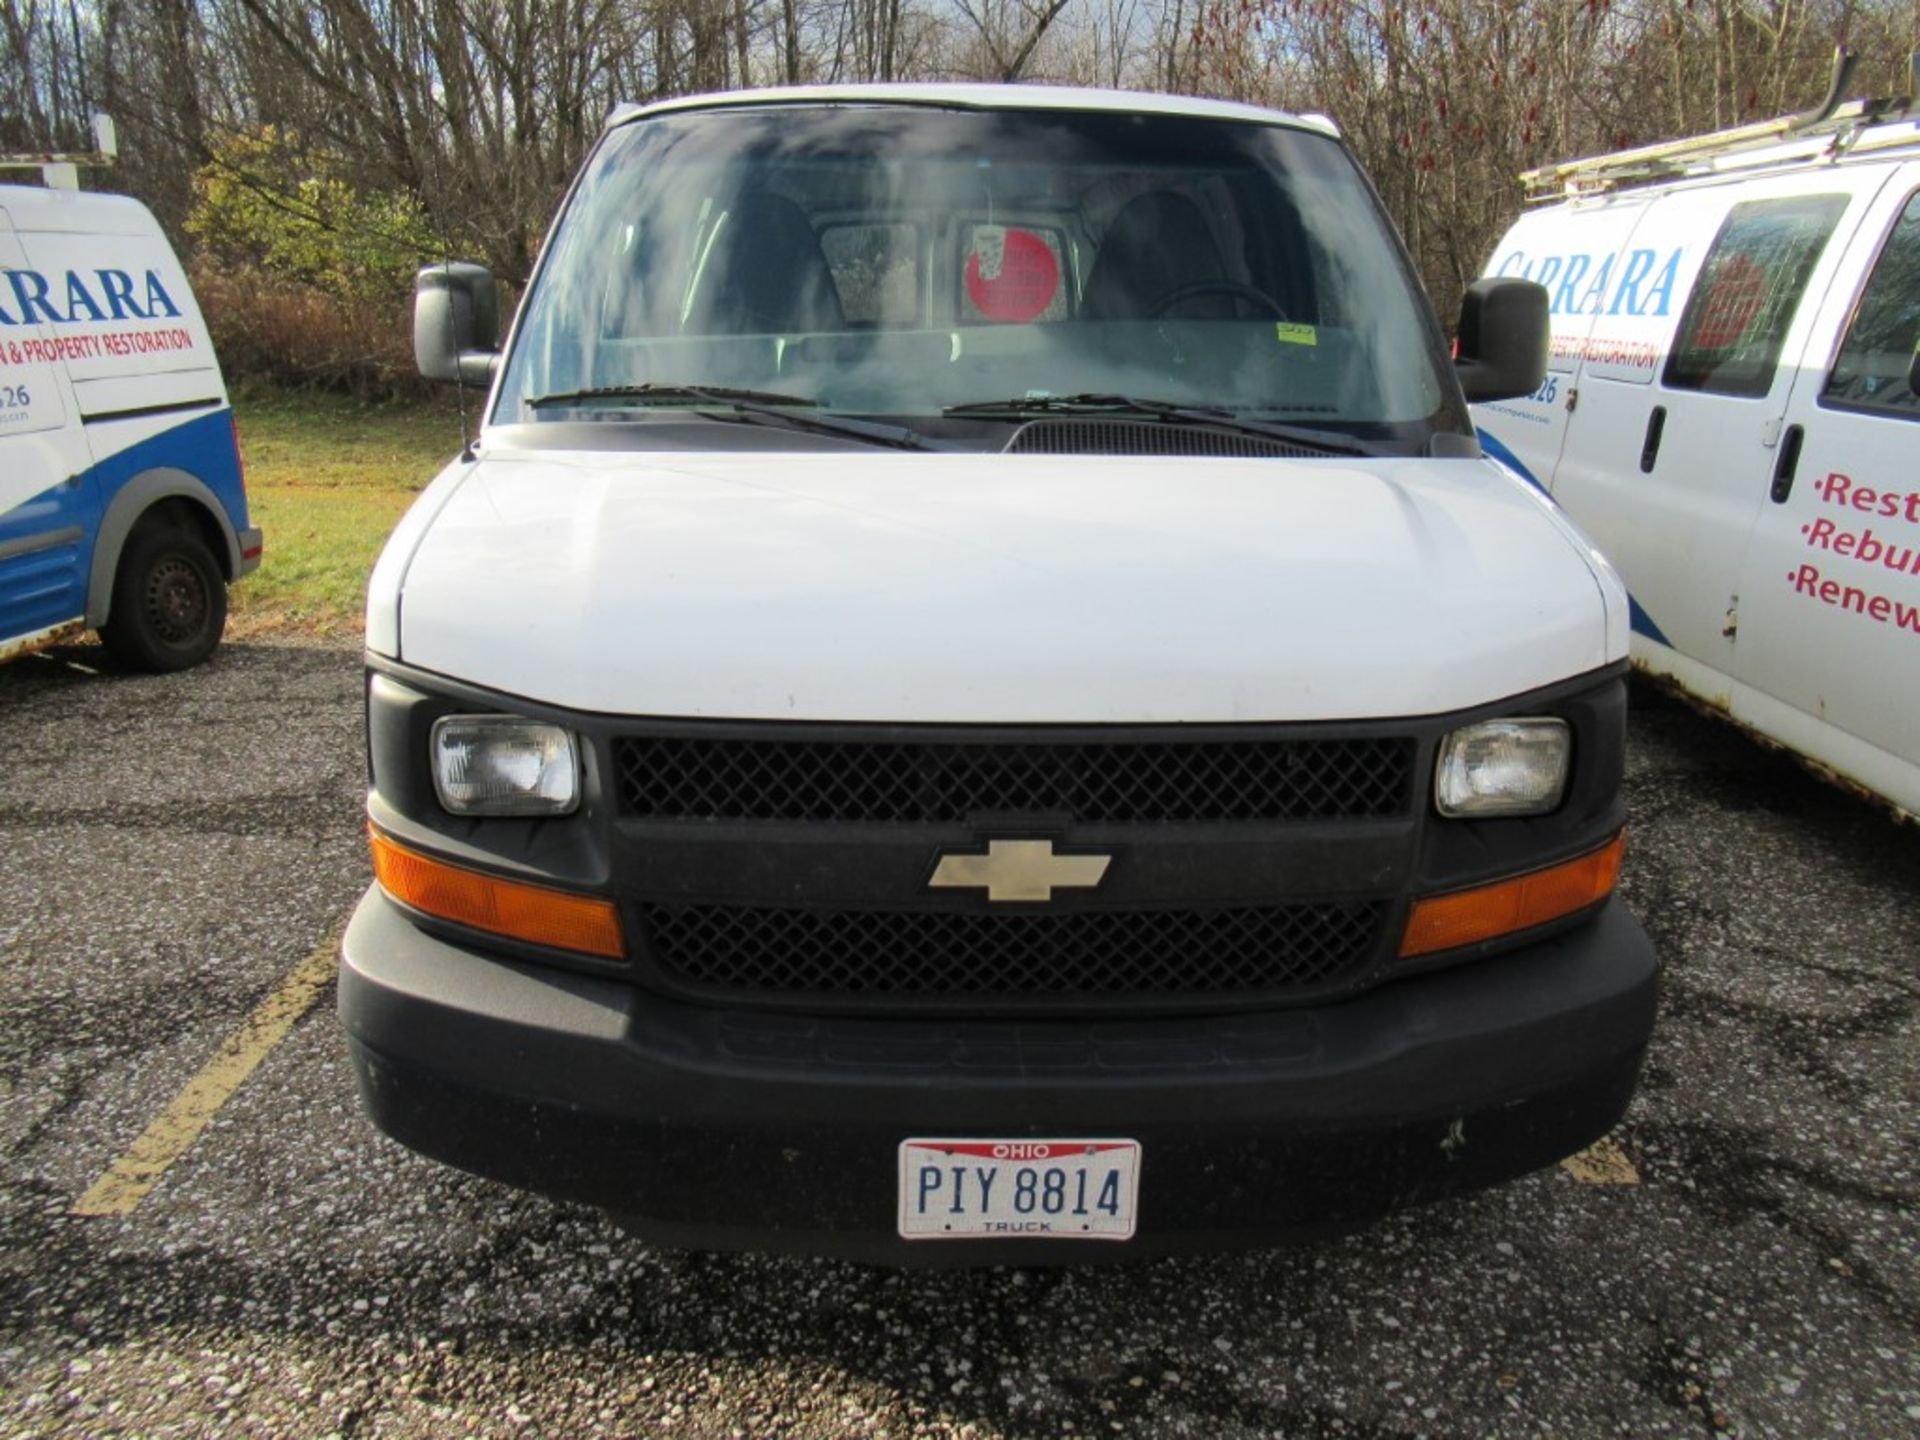 2012 Chevrolet Express Cargo Van, VIN 1GCWGGBA8C1154264, Automatic, AC, AM/FM, Towing, Cracked - Image 3 of 26